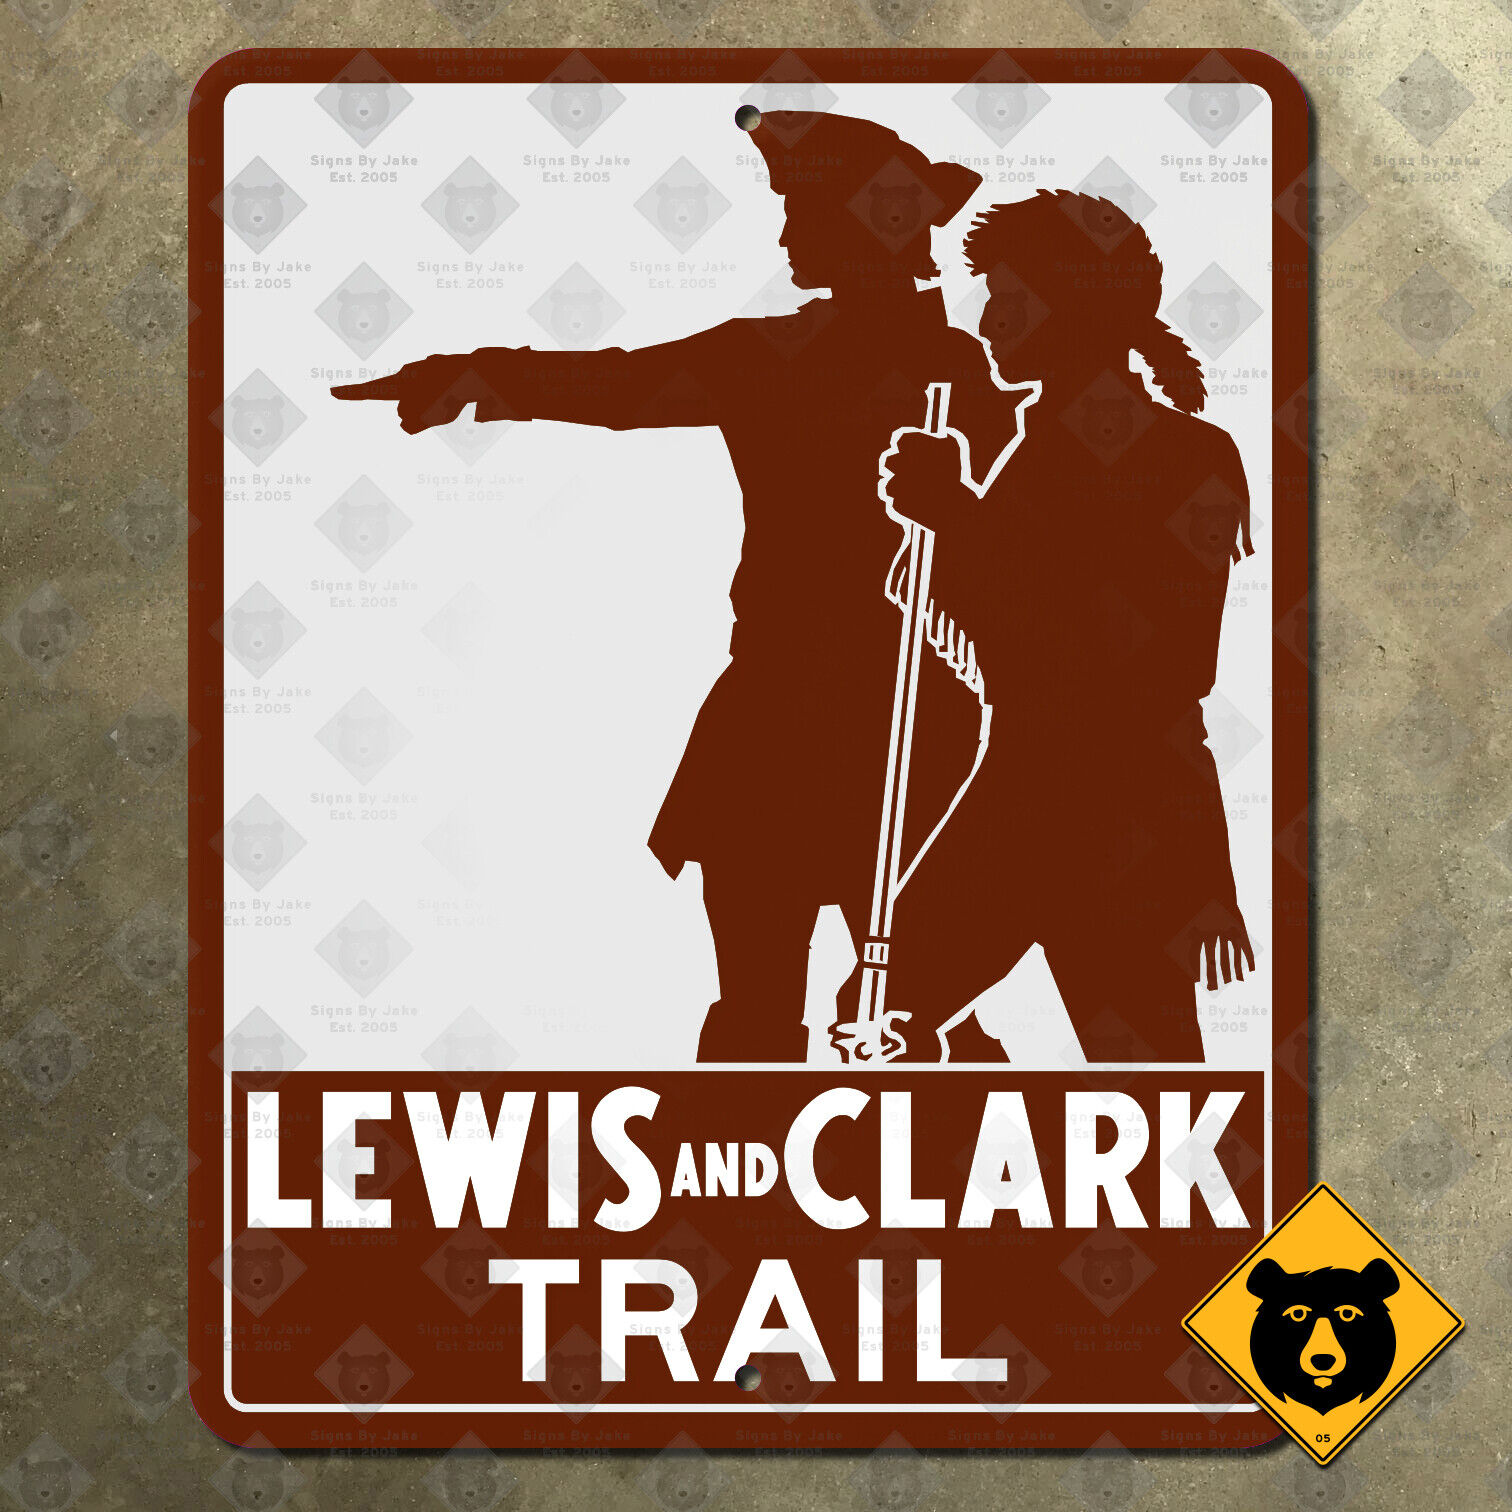 Lewis and Clark Trail highway marker road sign historic auto tour route 9x12